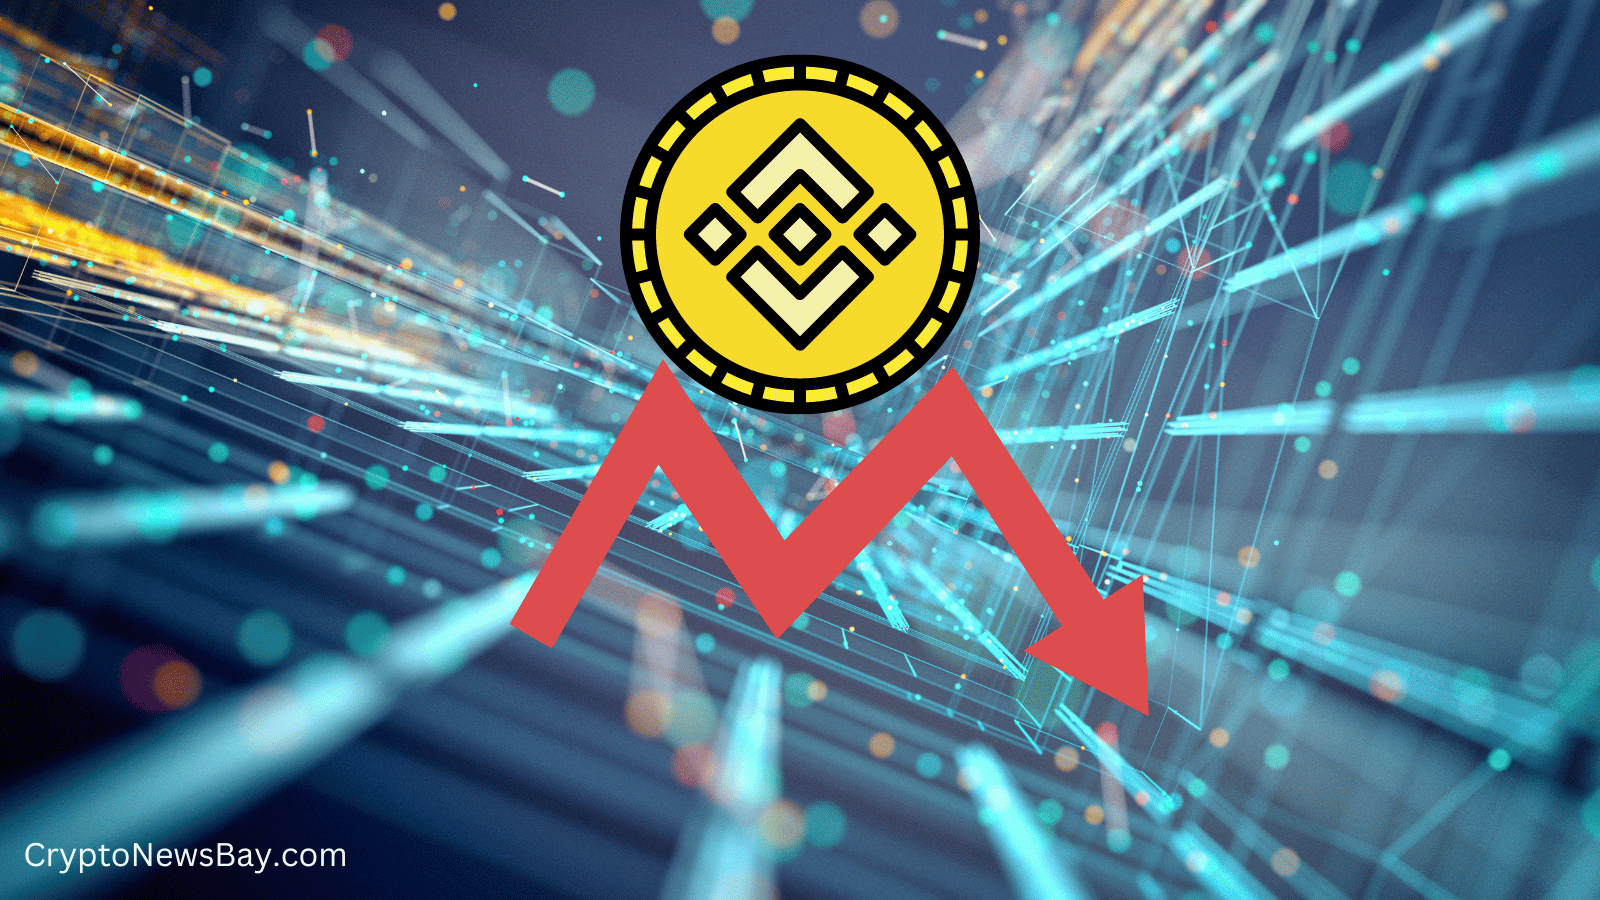 Binance Coin (BNB) Liquidation Concerns Amidst Ongoing Decline and Regulatory Pressures